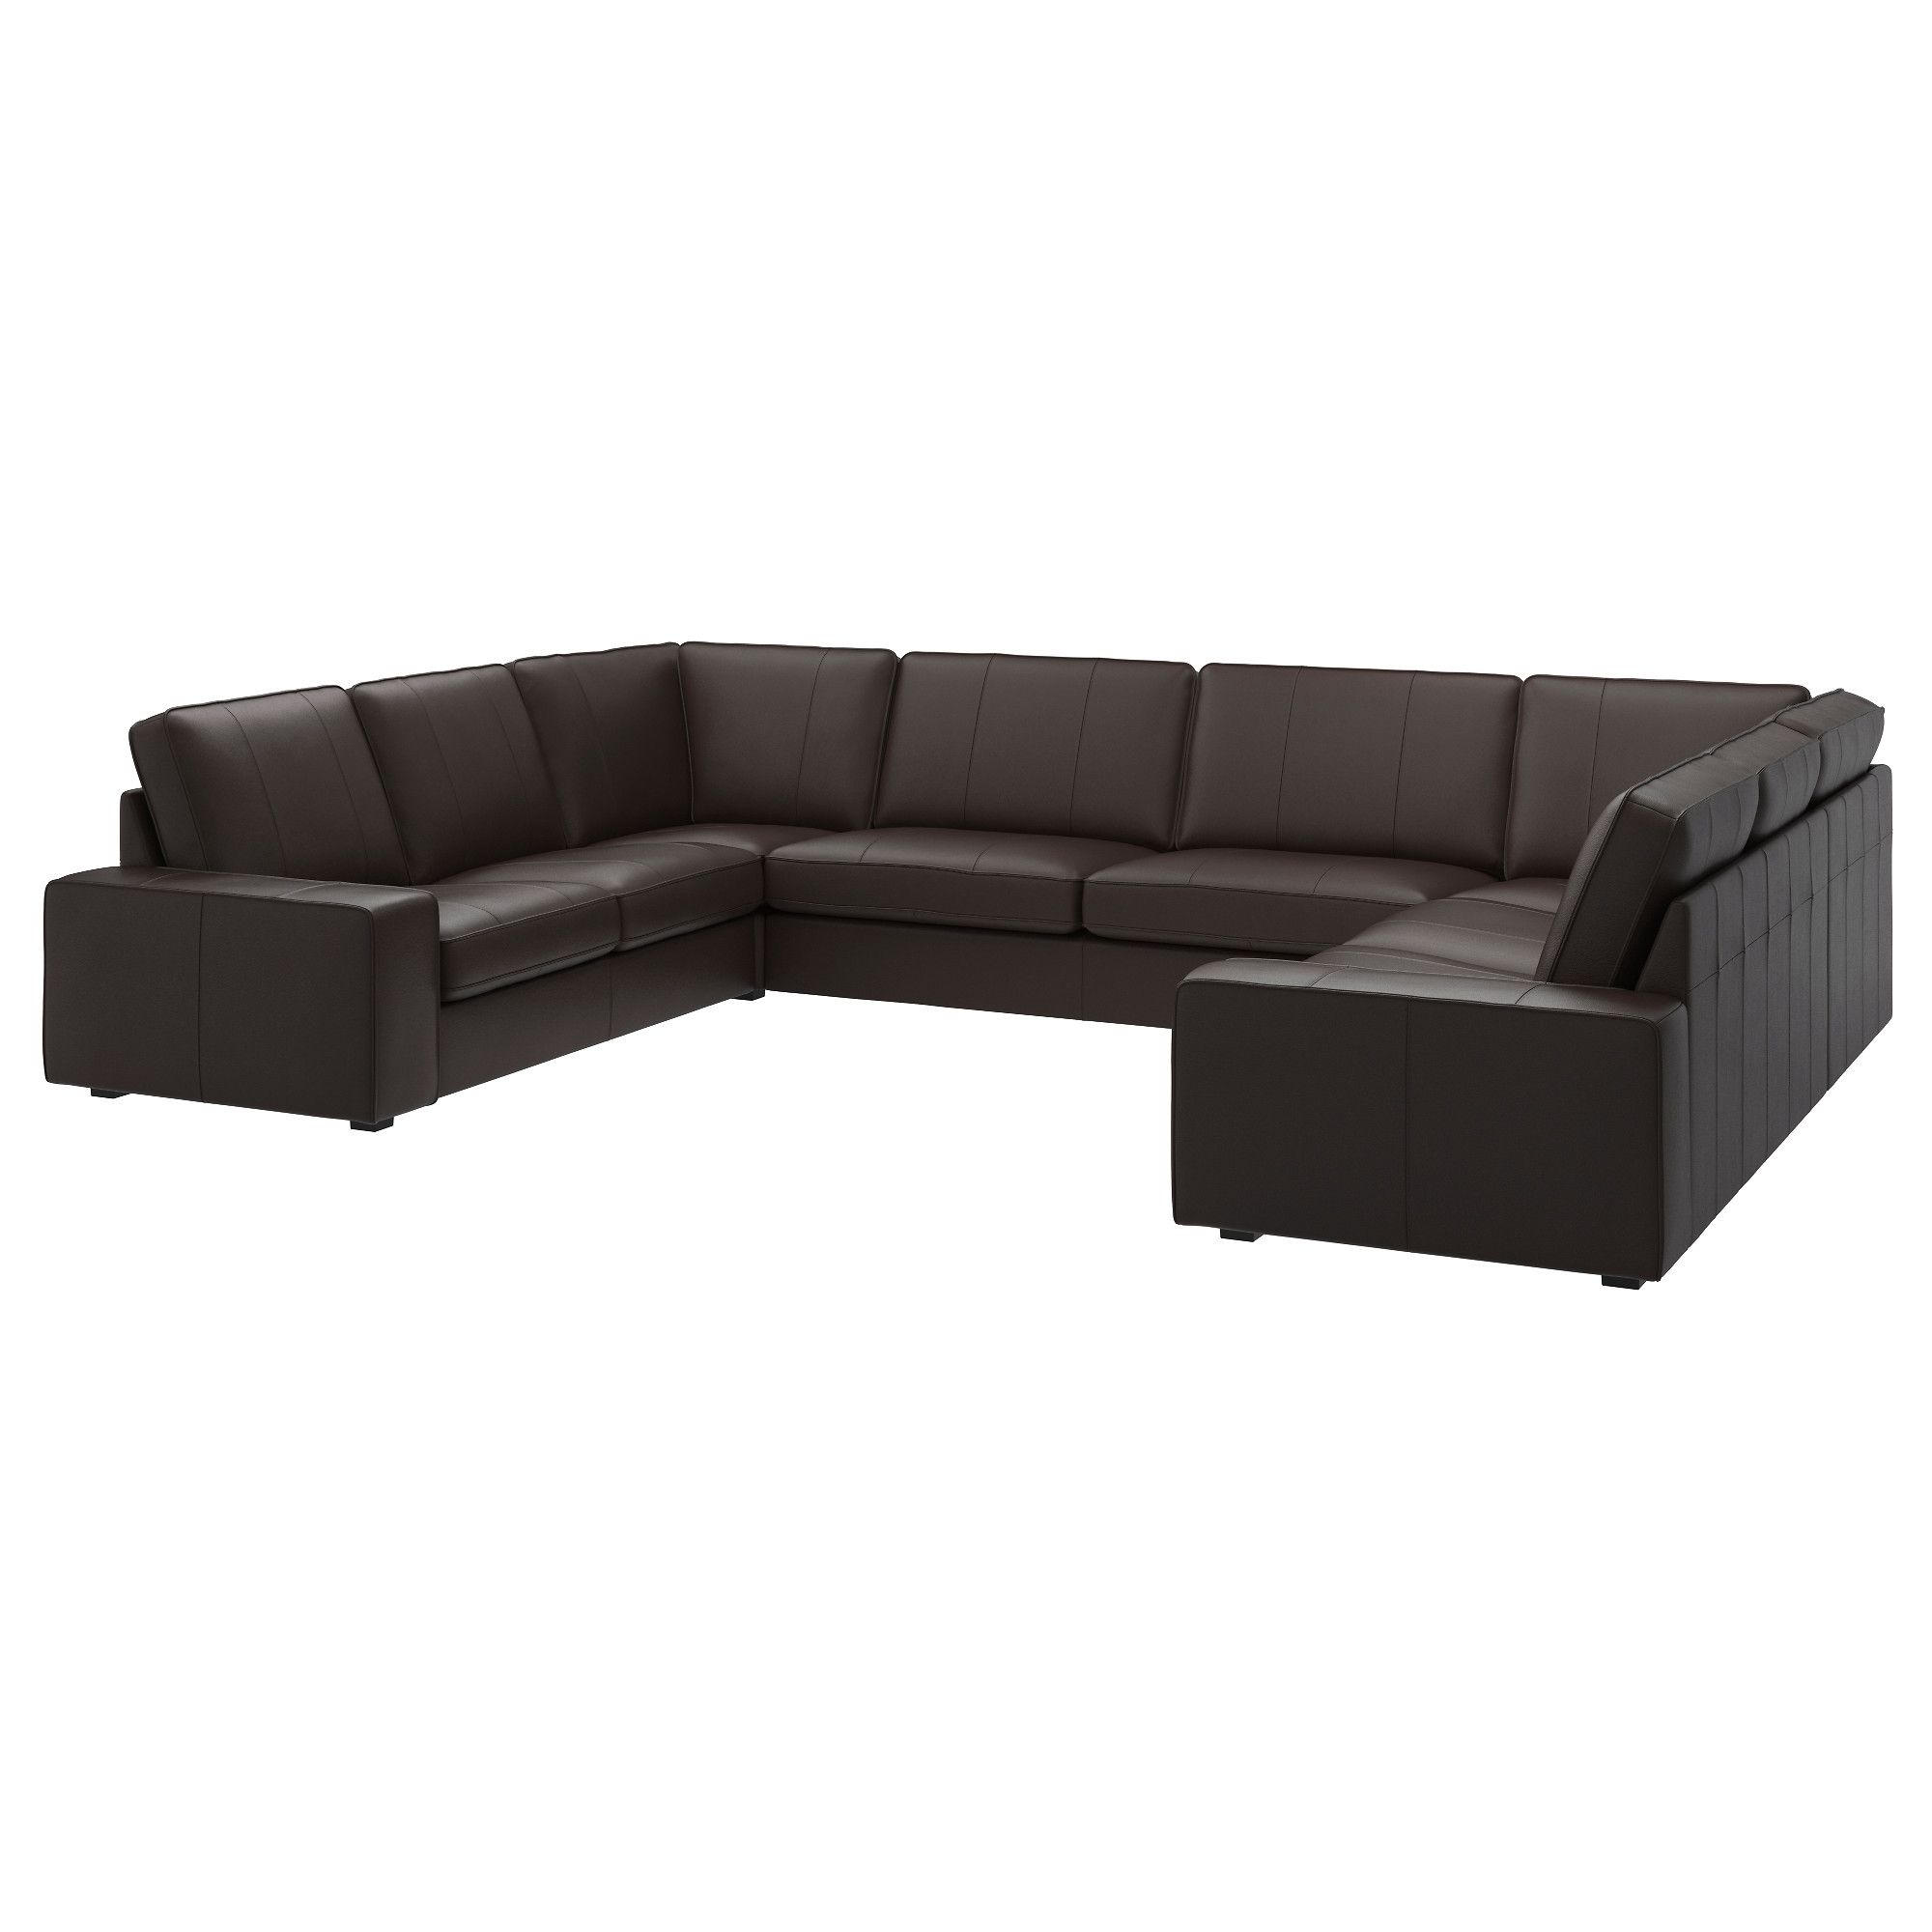 Leather Faux Leather Couches Chairs Ottomans Ikea Throughout 4 Seat Leather Sofas (View 5 of 15)